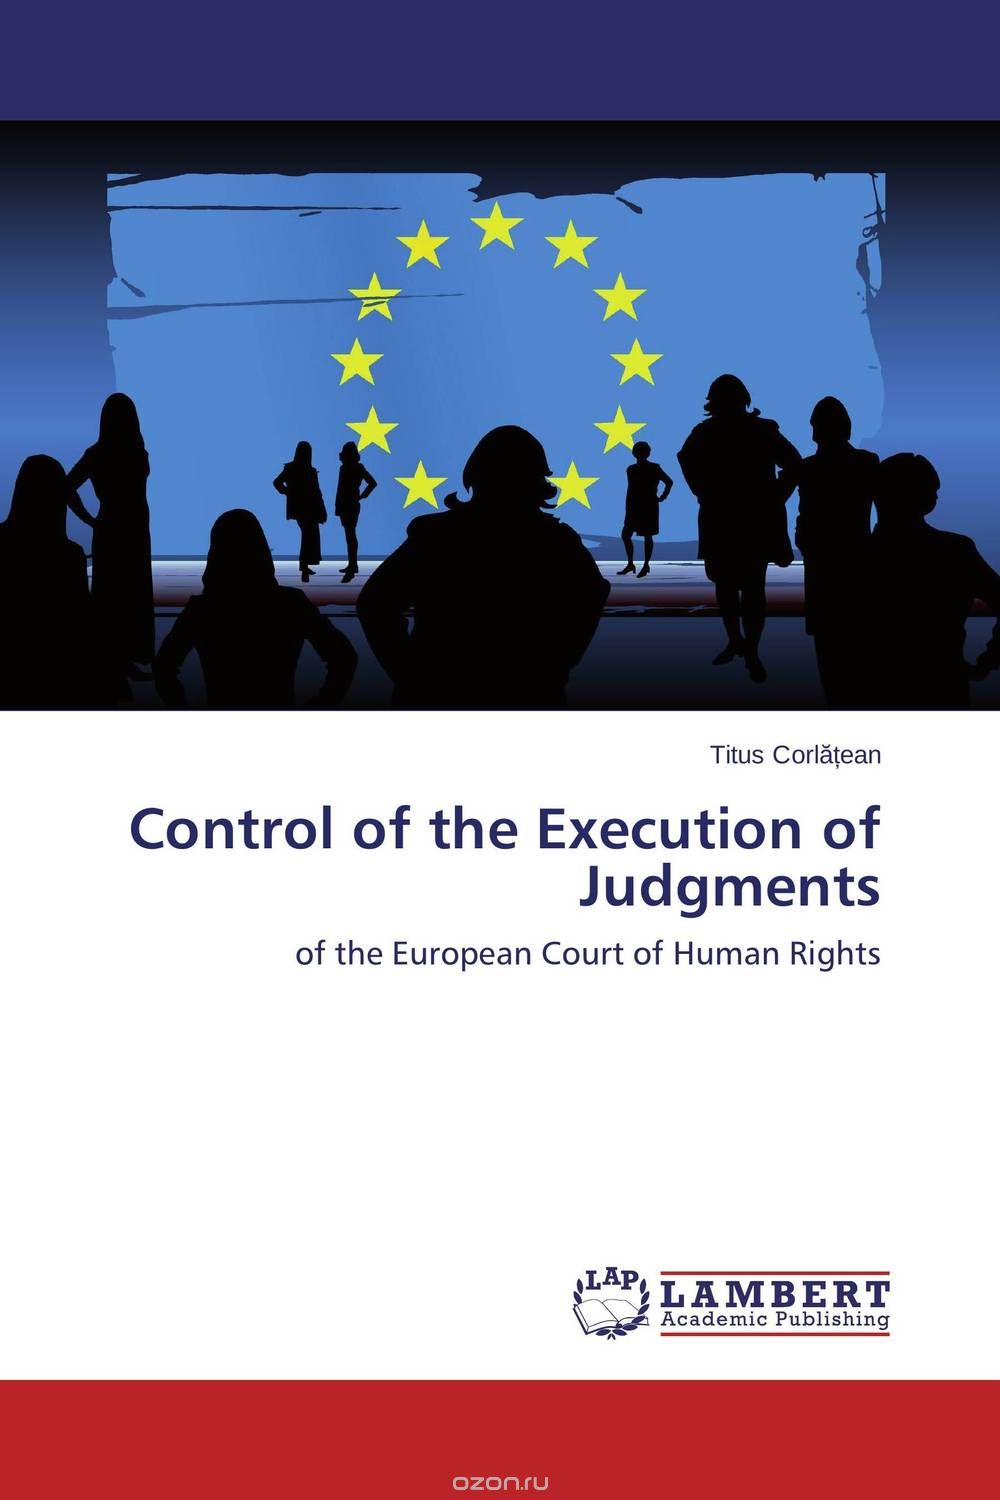 Control of the Execution of Judgments